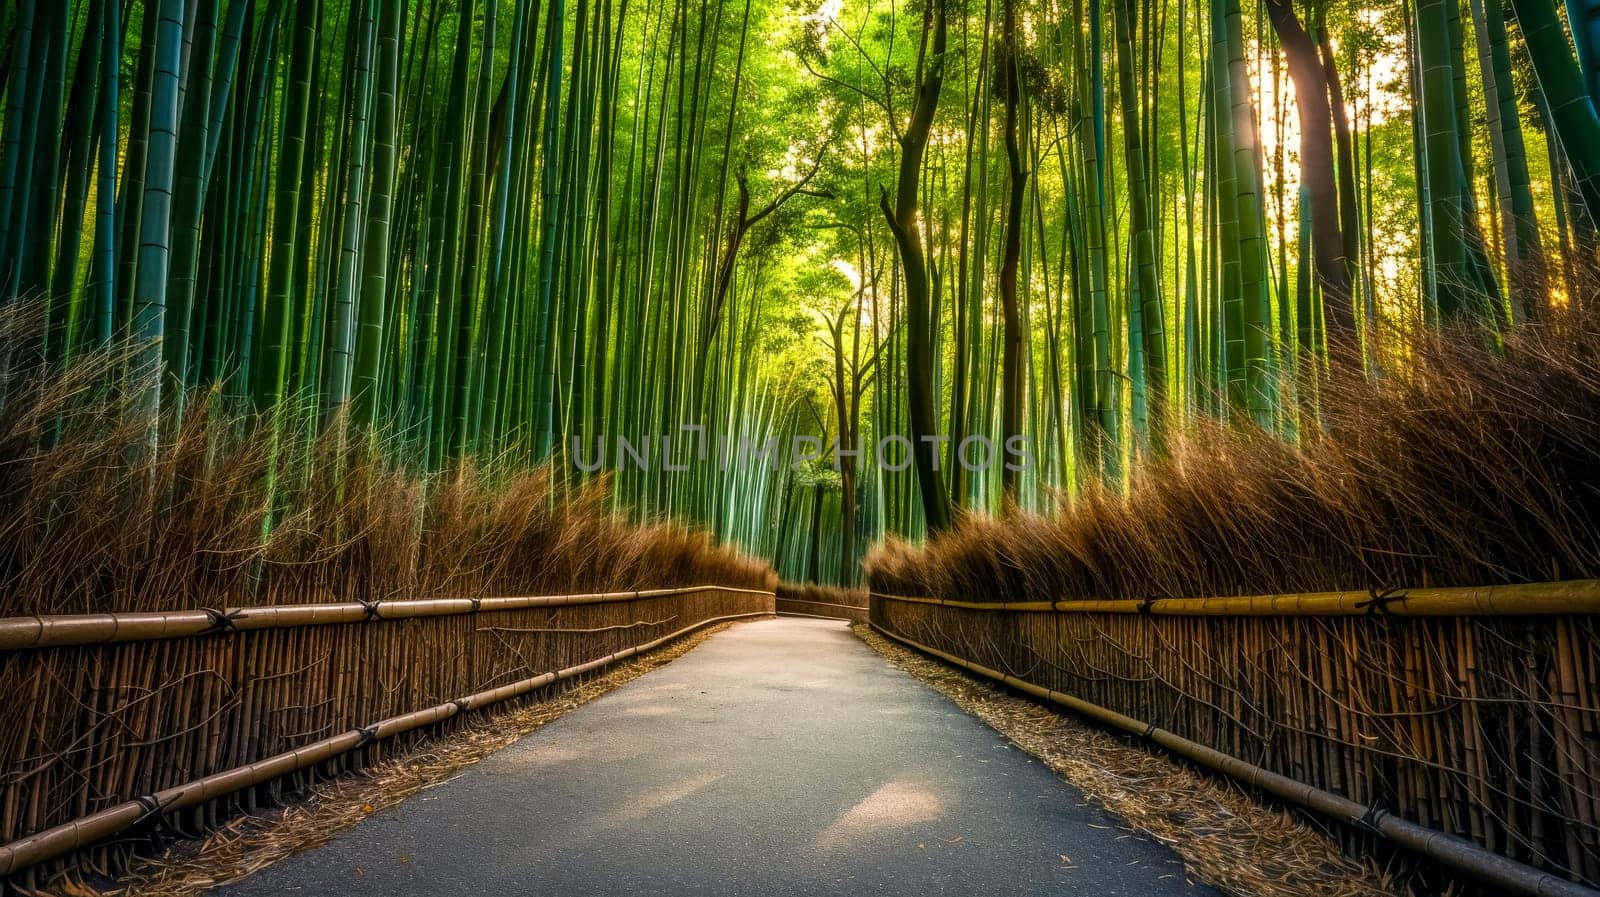 Serene bamboo forest pathway at sunset by Edophoto